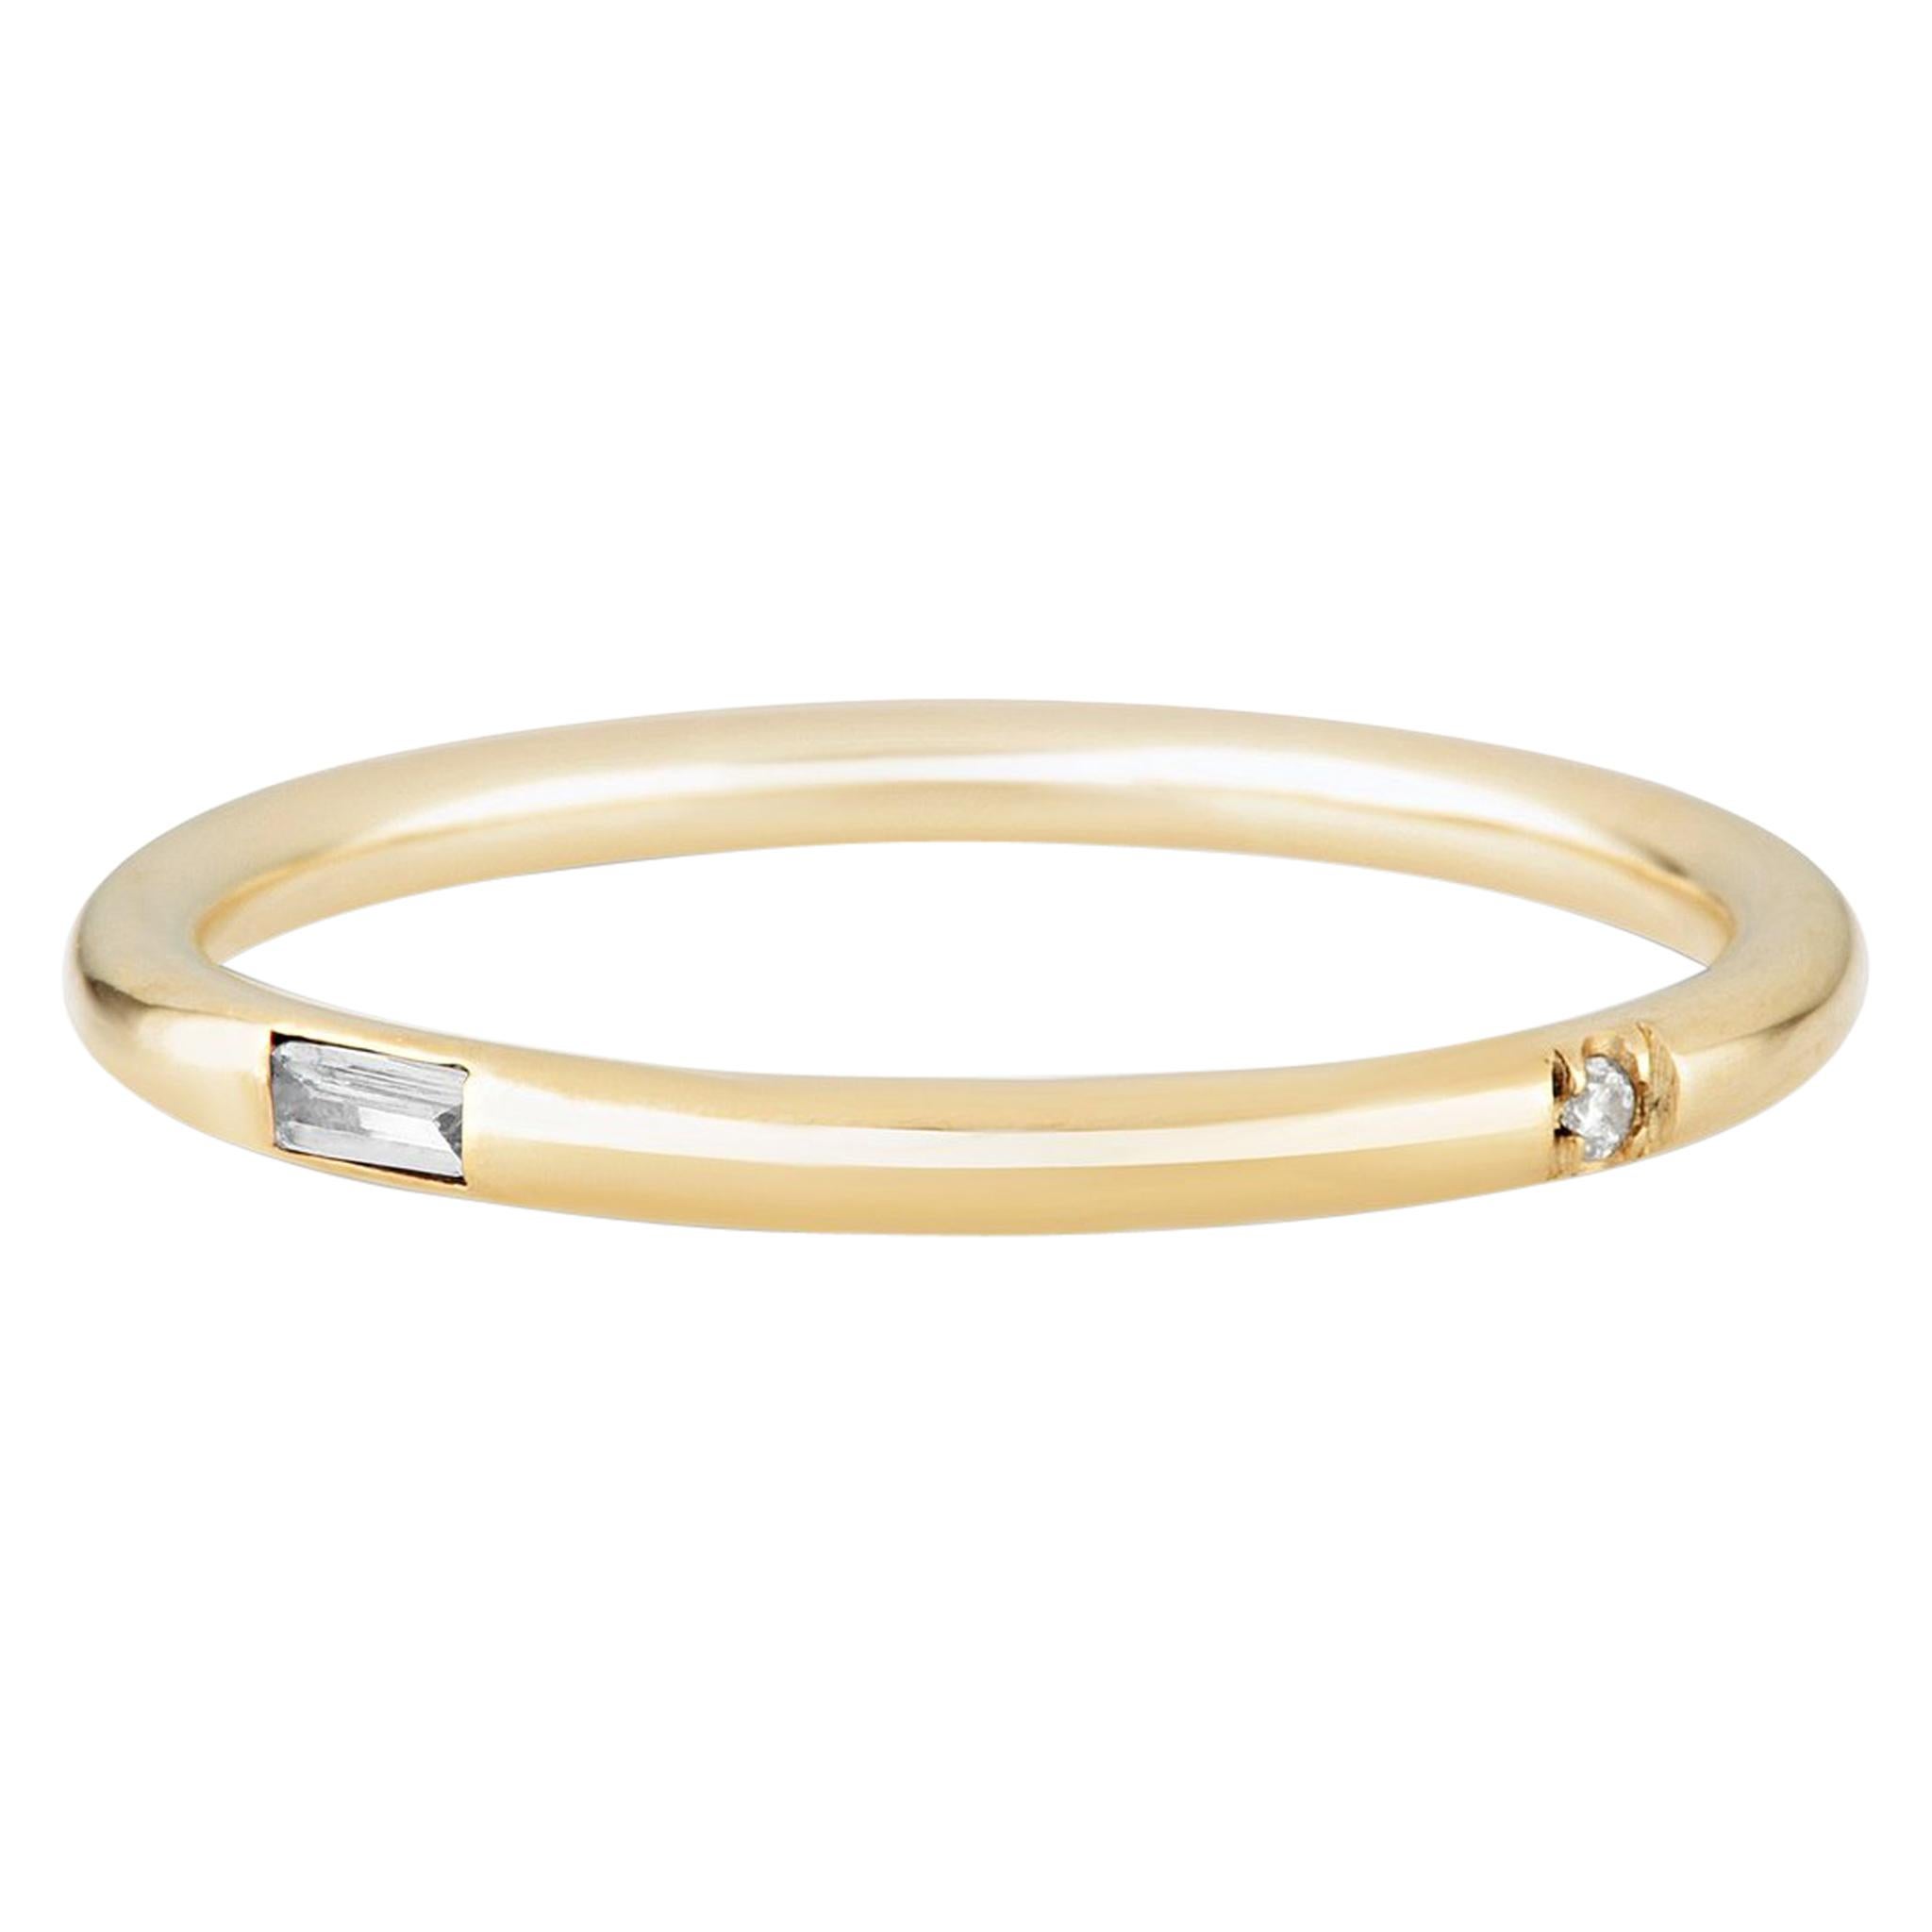 Maniamania Immersion Ring Band in 14 Karat Yellow Gold and White Diamonds For Sale